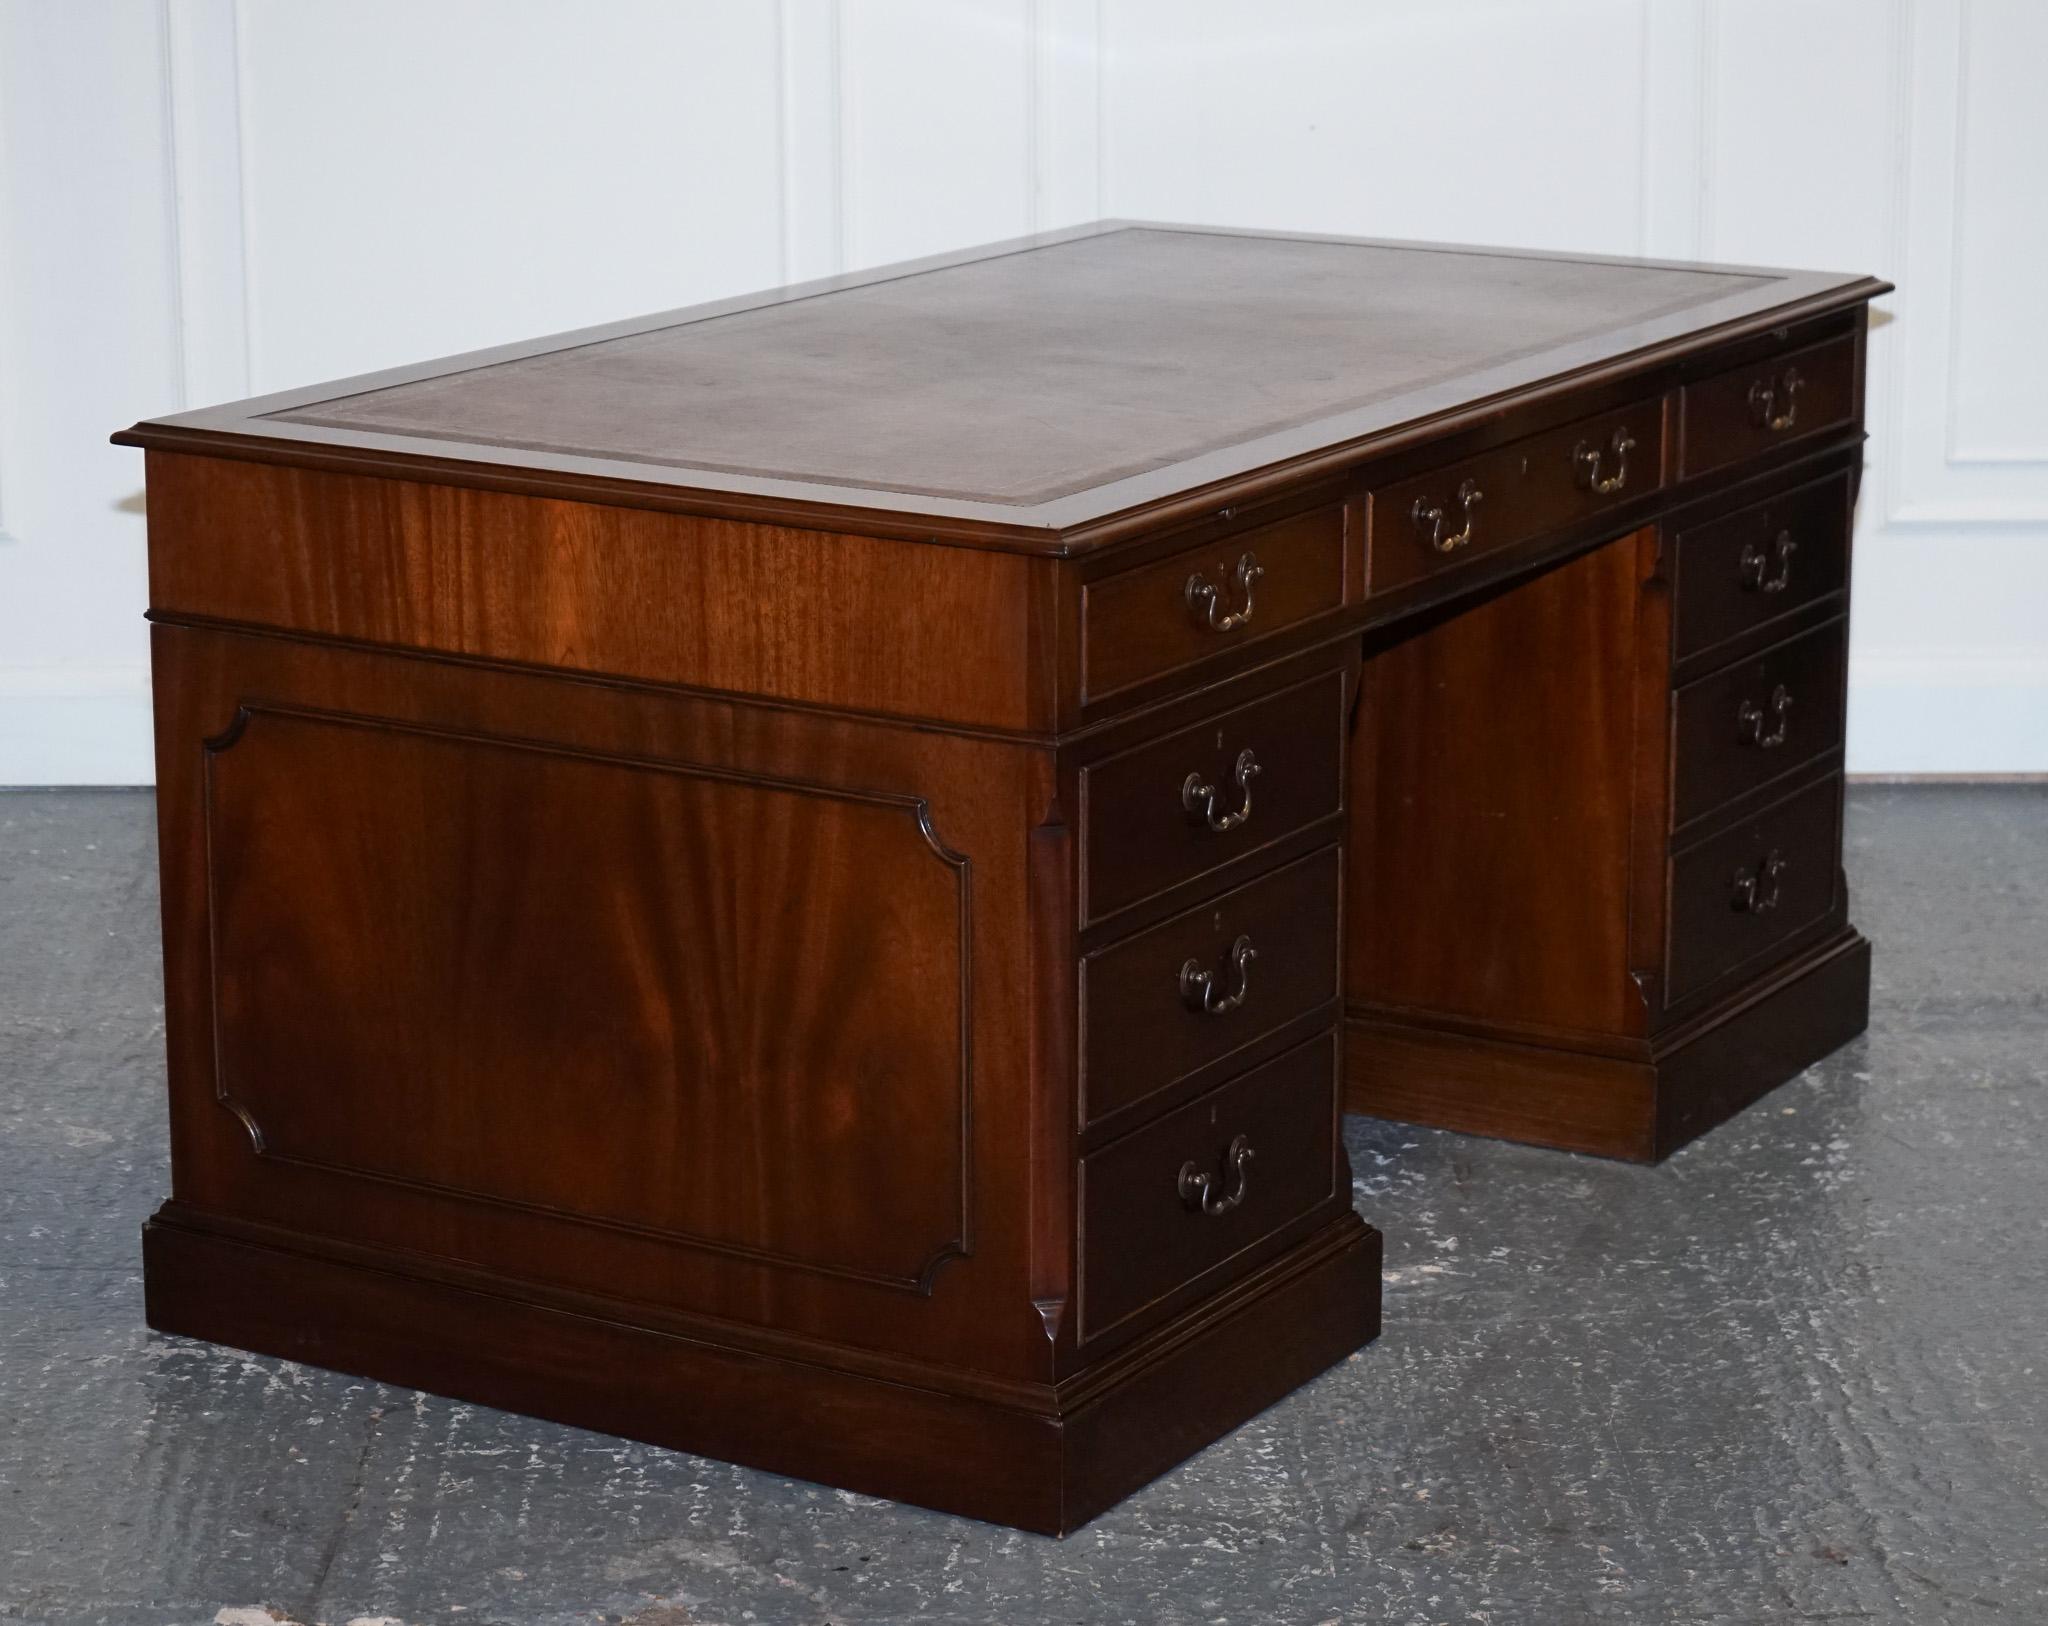 STUNNING LARGE TWiN PEDESTAL DESK BROWN LEATHER TOP SLIDING OUT TRAYS 8 DRAWERS For Sale 9